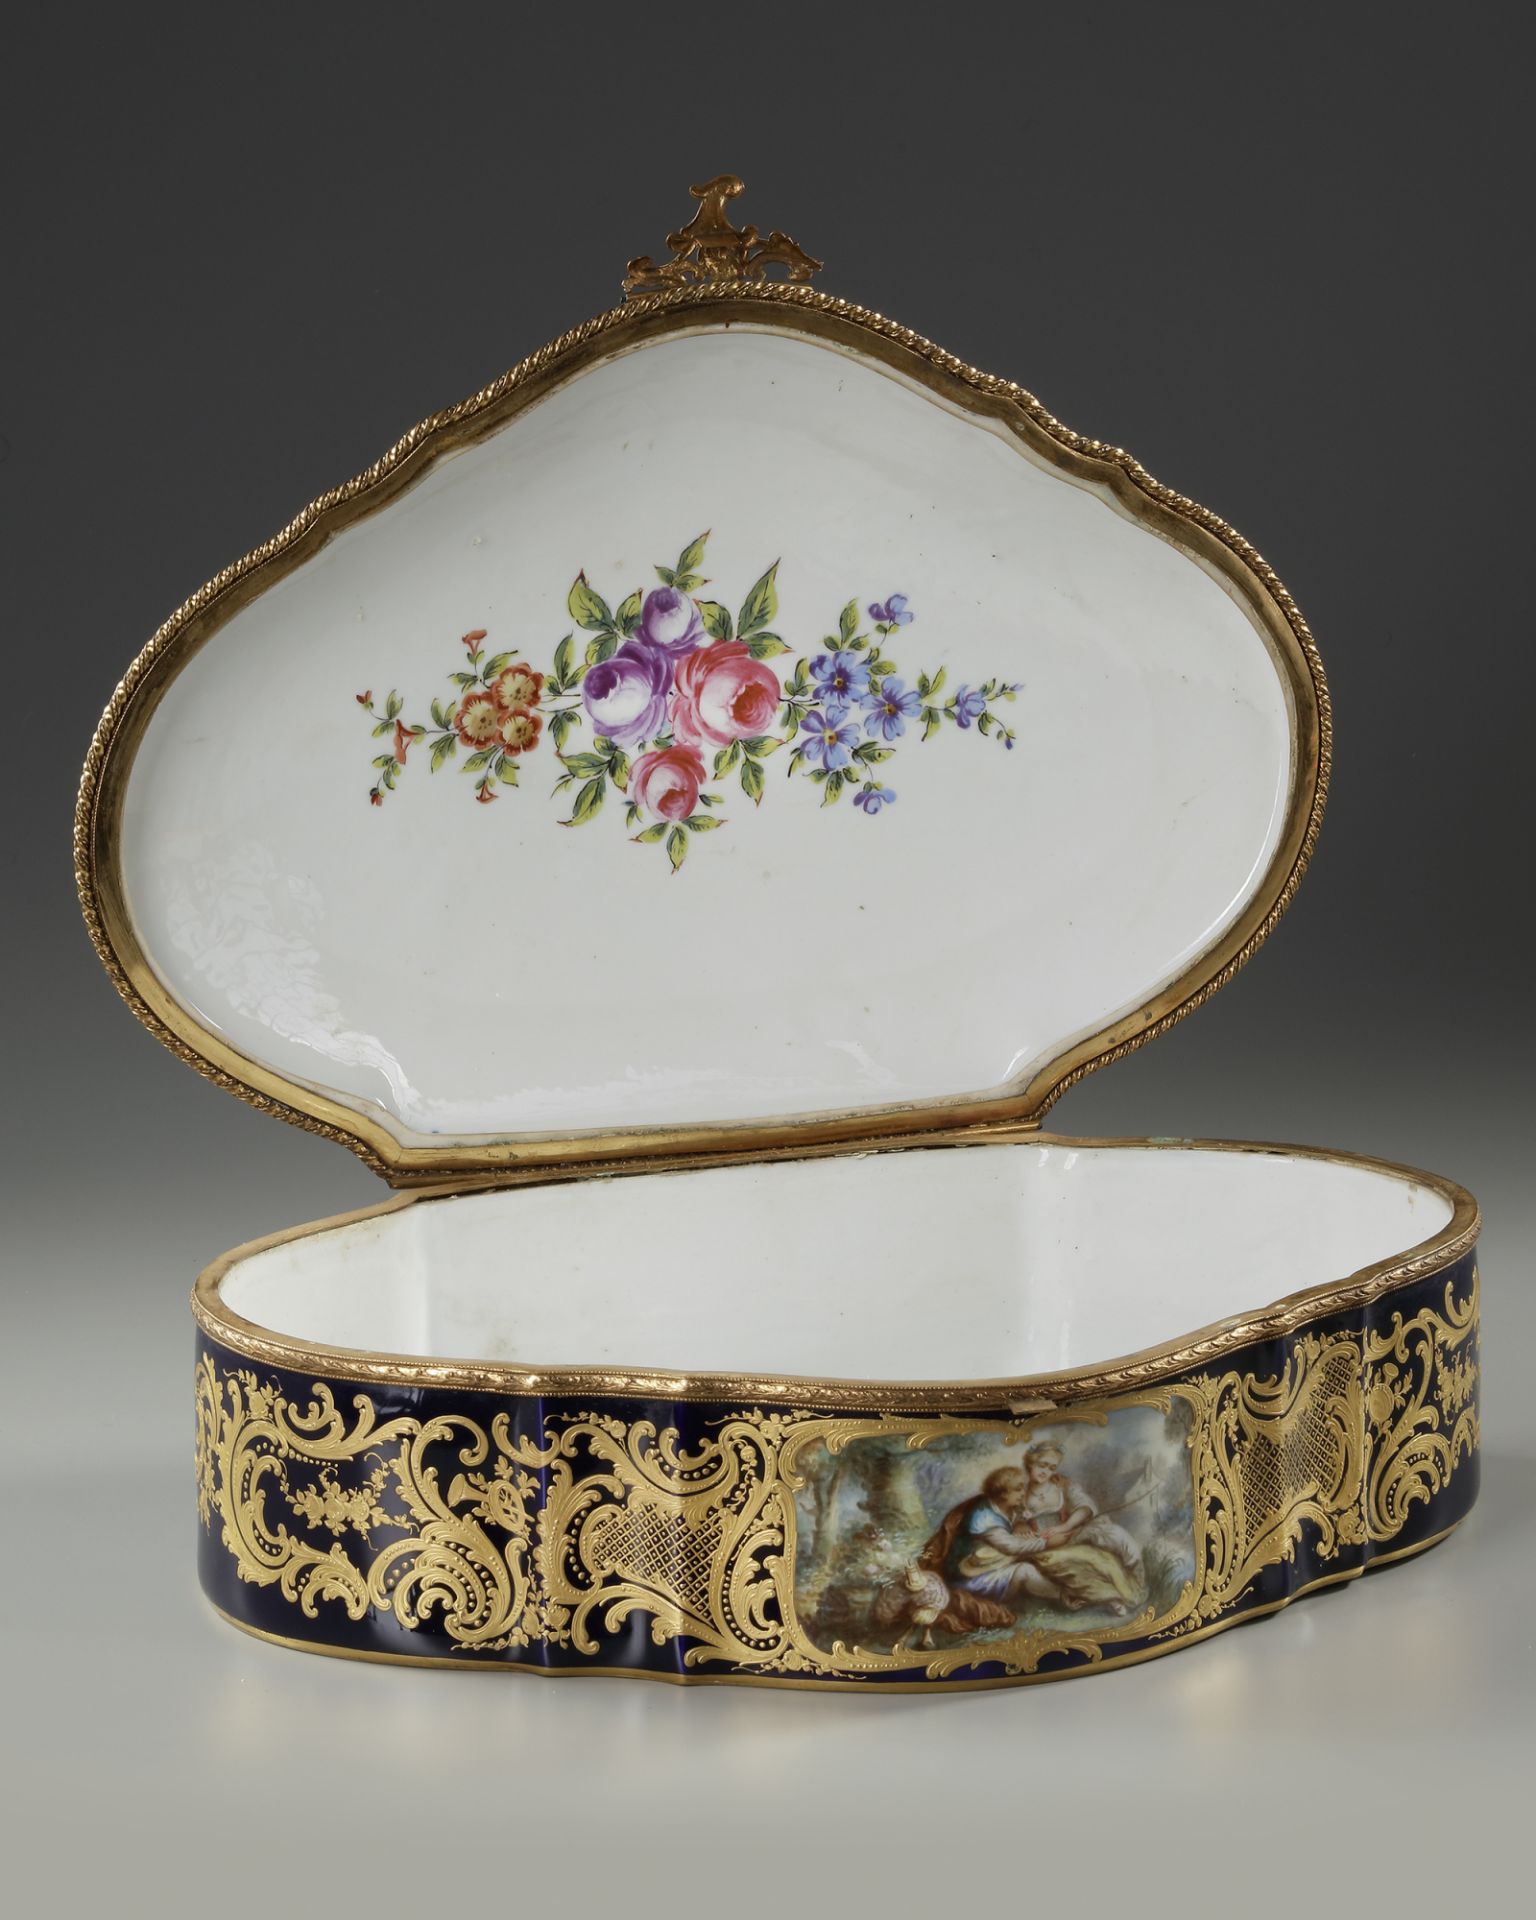 A PORCELAIN JEWELRY BOX, 19TH CENTURY - Image 5 of 5